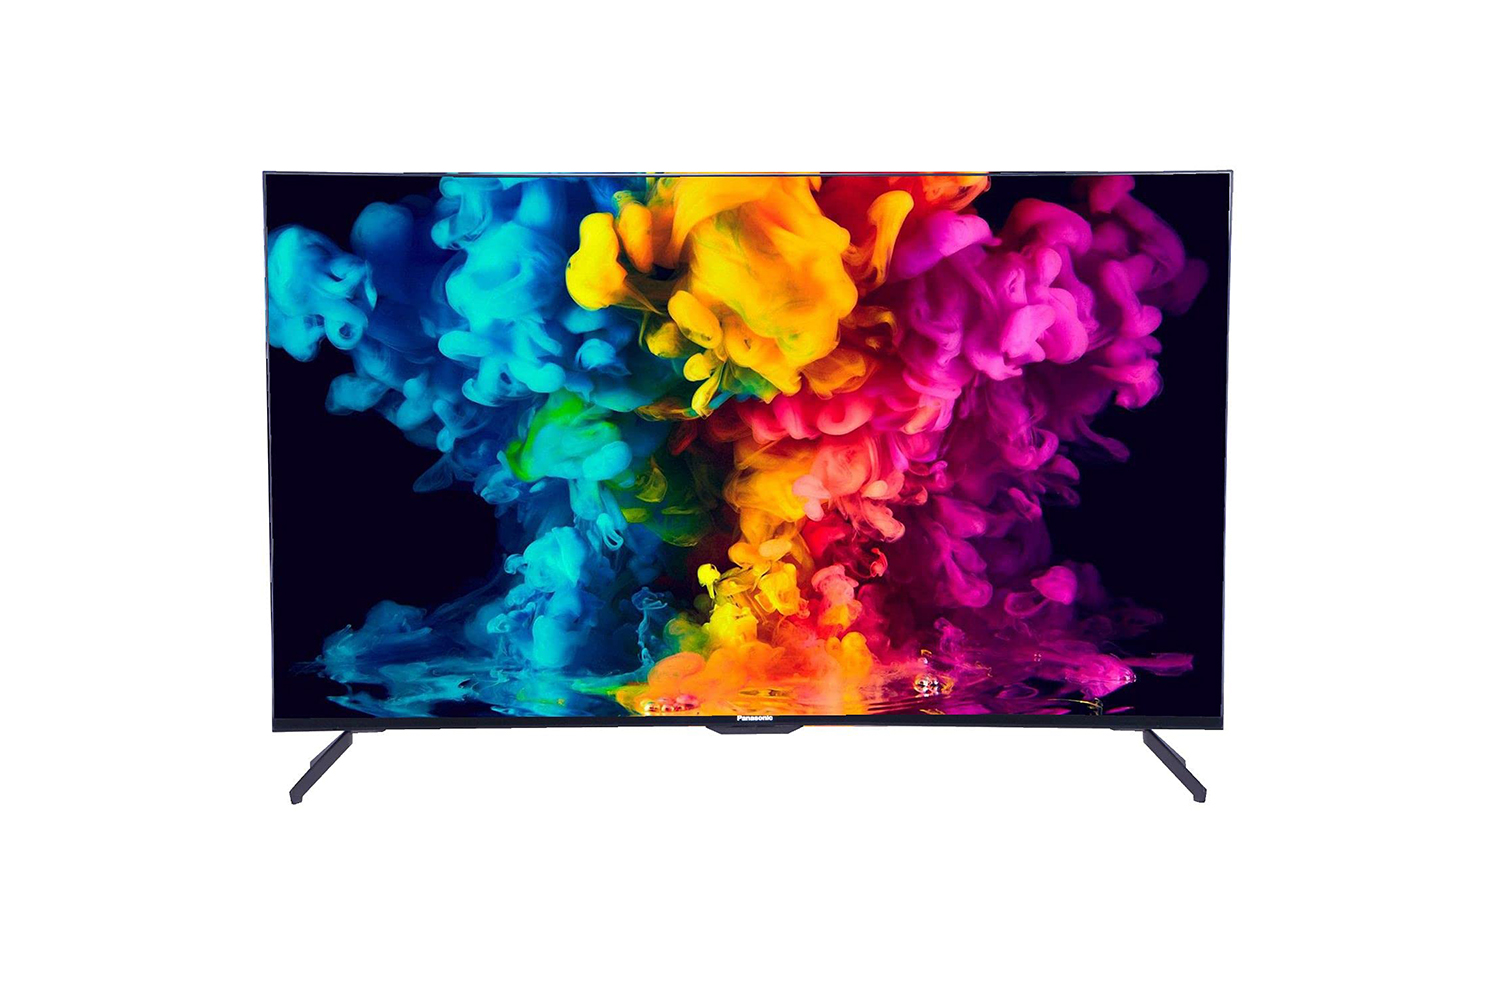 Panasonic 108 cm (43 Inches) 4K Ultra HD Smart Android LED TV TH-43JX750DX